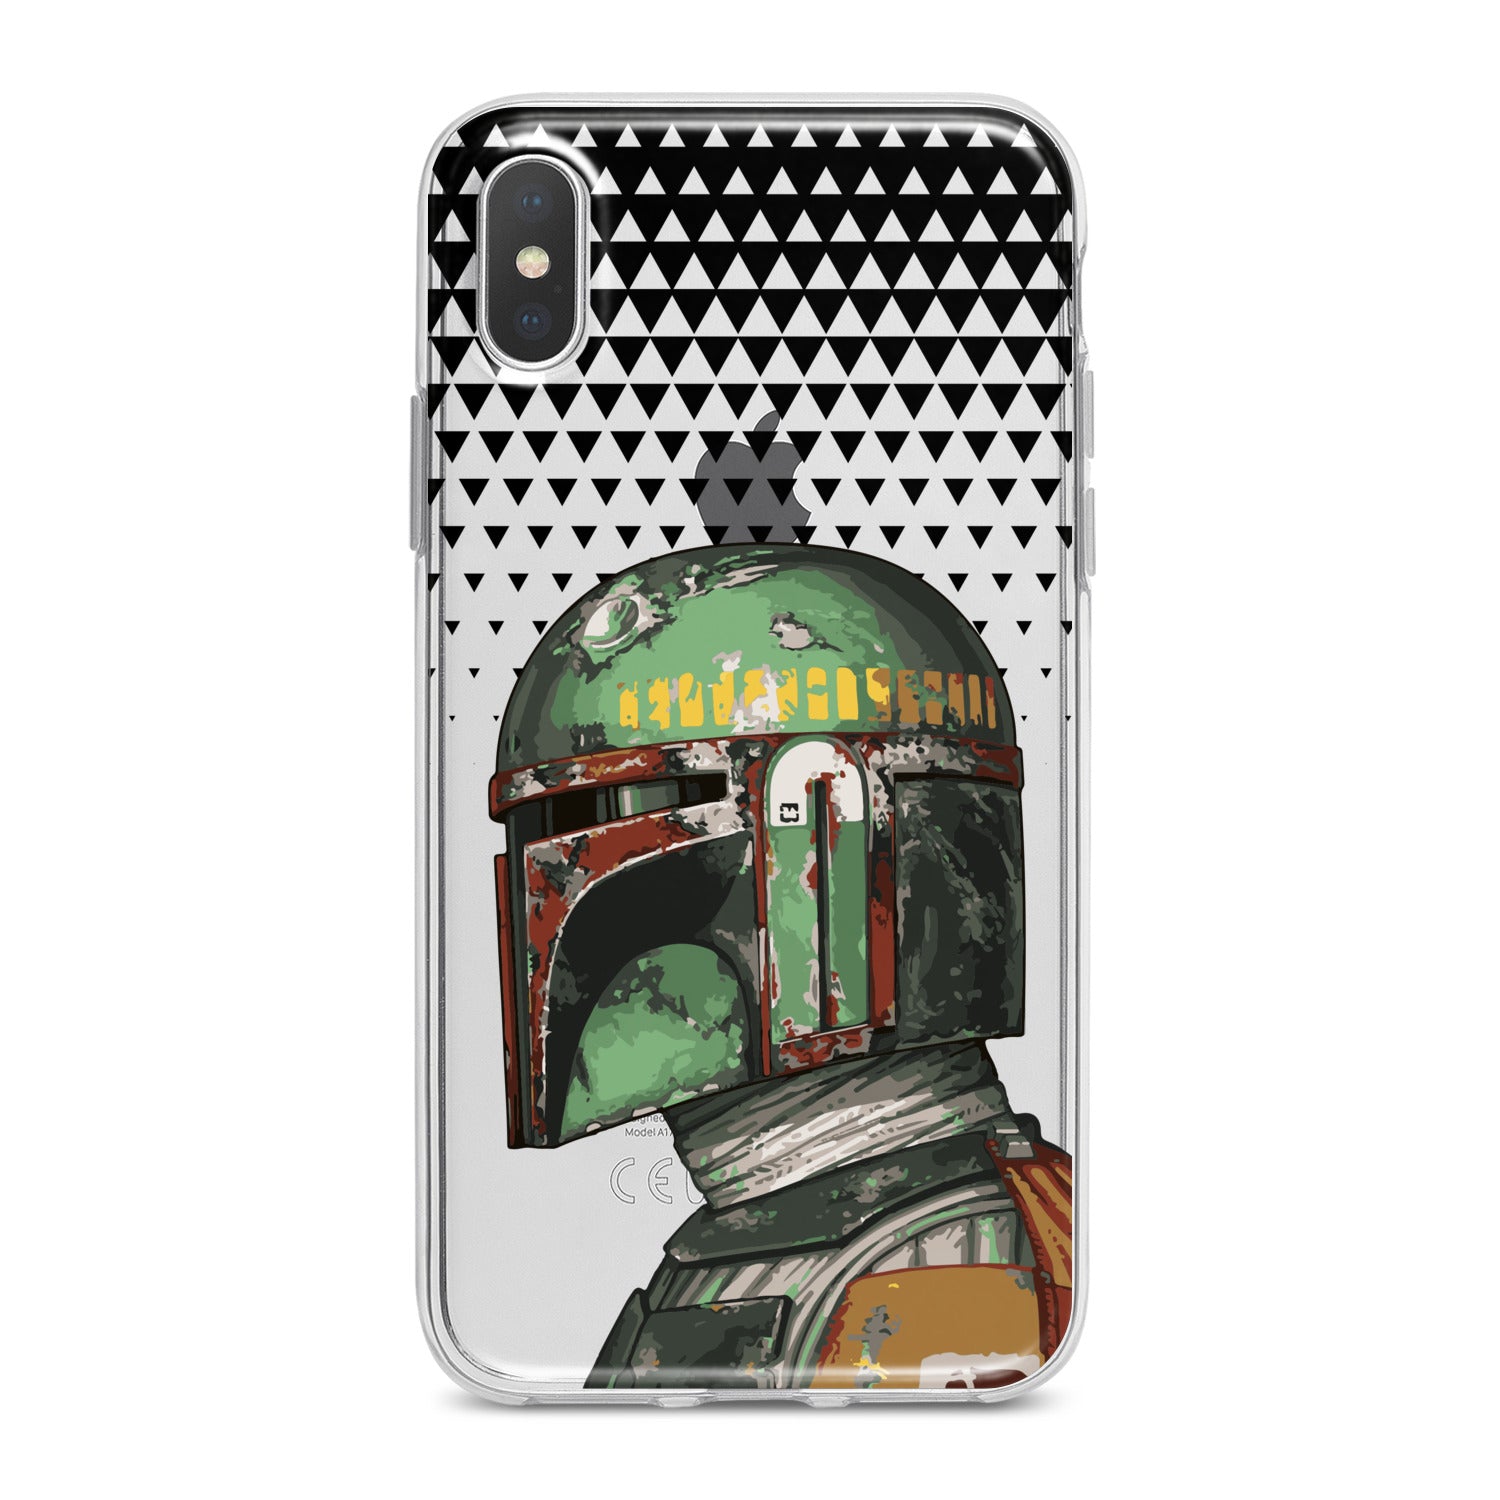 Lex Altern Boba Fett Phone Case for your iPhone & Android phone.